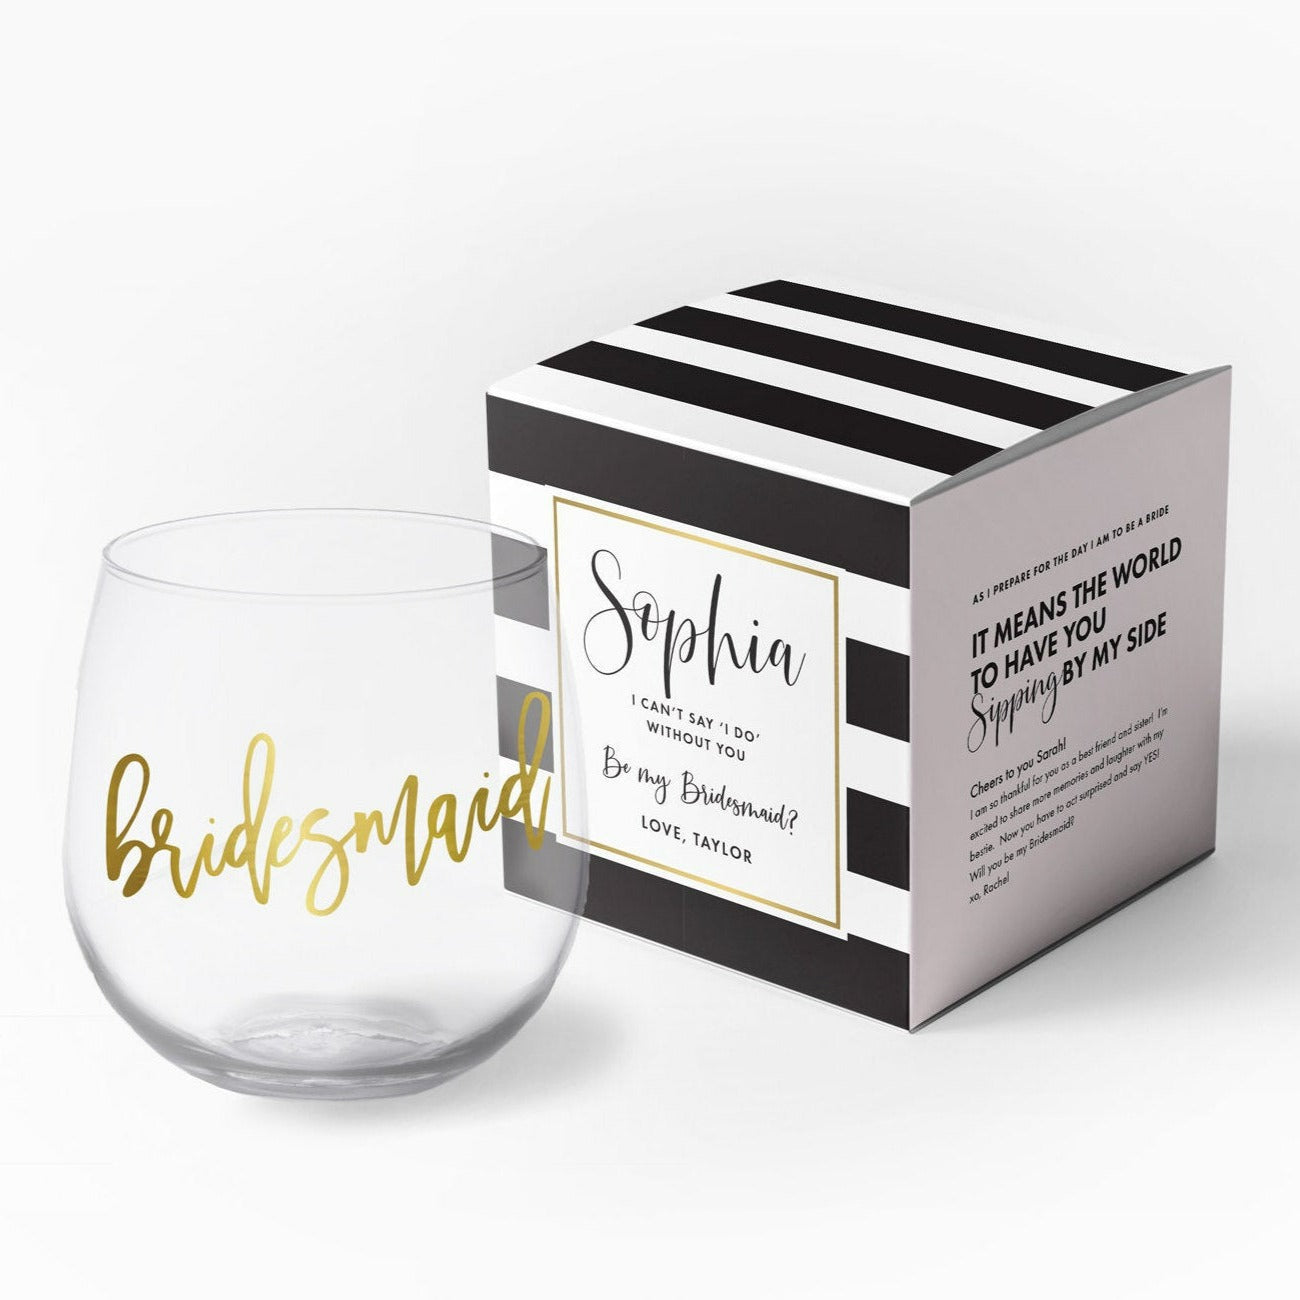 Personalized Crystal Stemless Wines - Great Wedding Gift